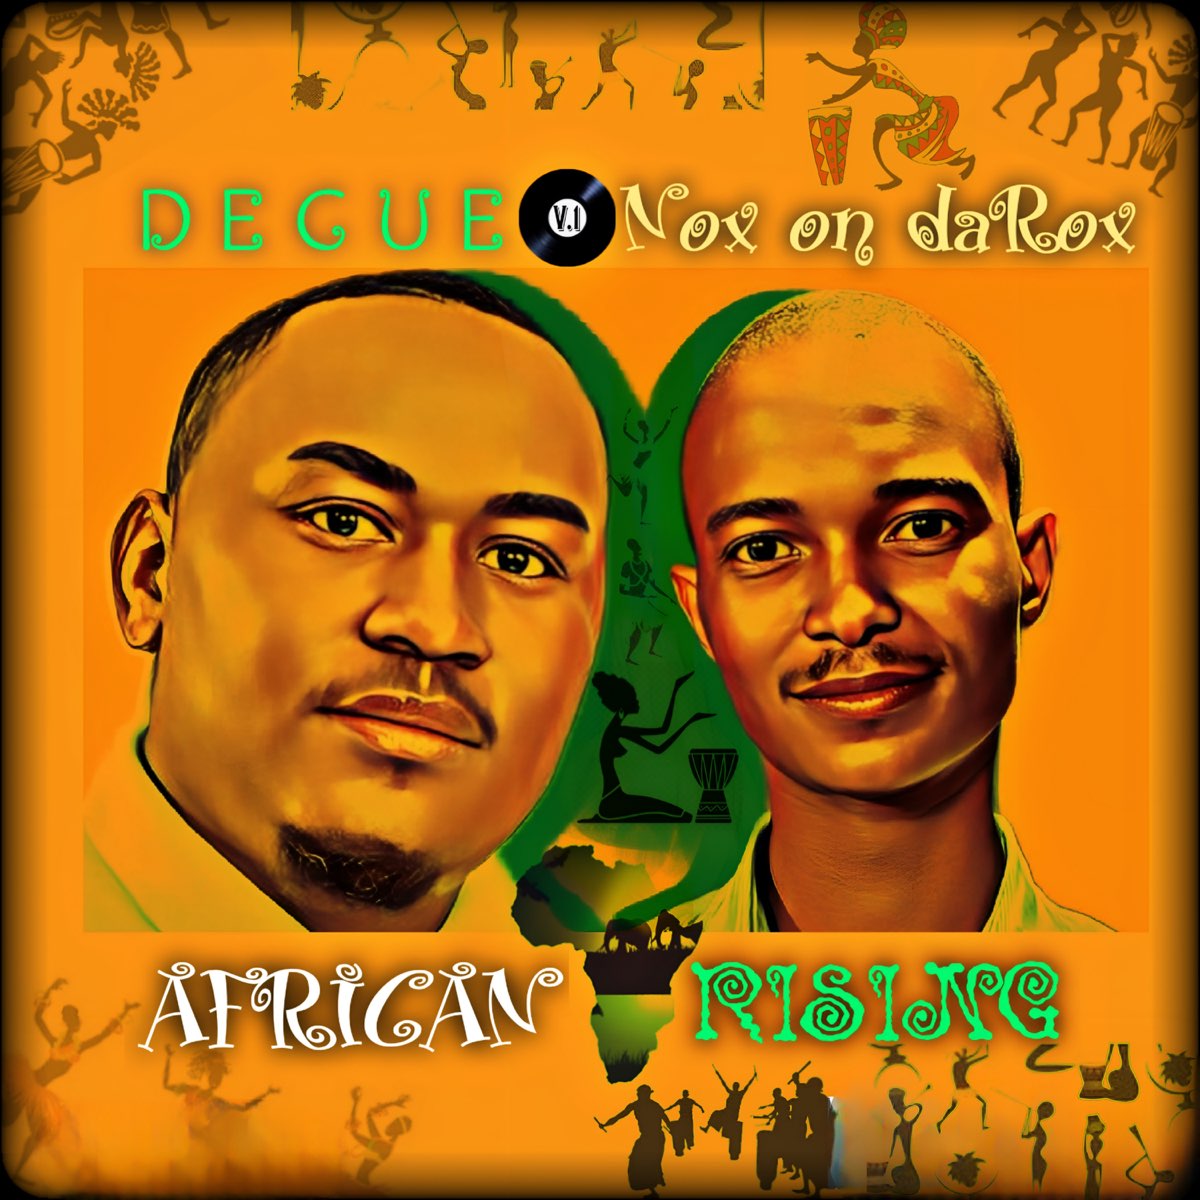 African Rising (feat. Decue) - EP - Album by Nox on daRox - Apple Music